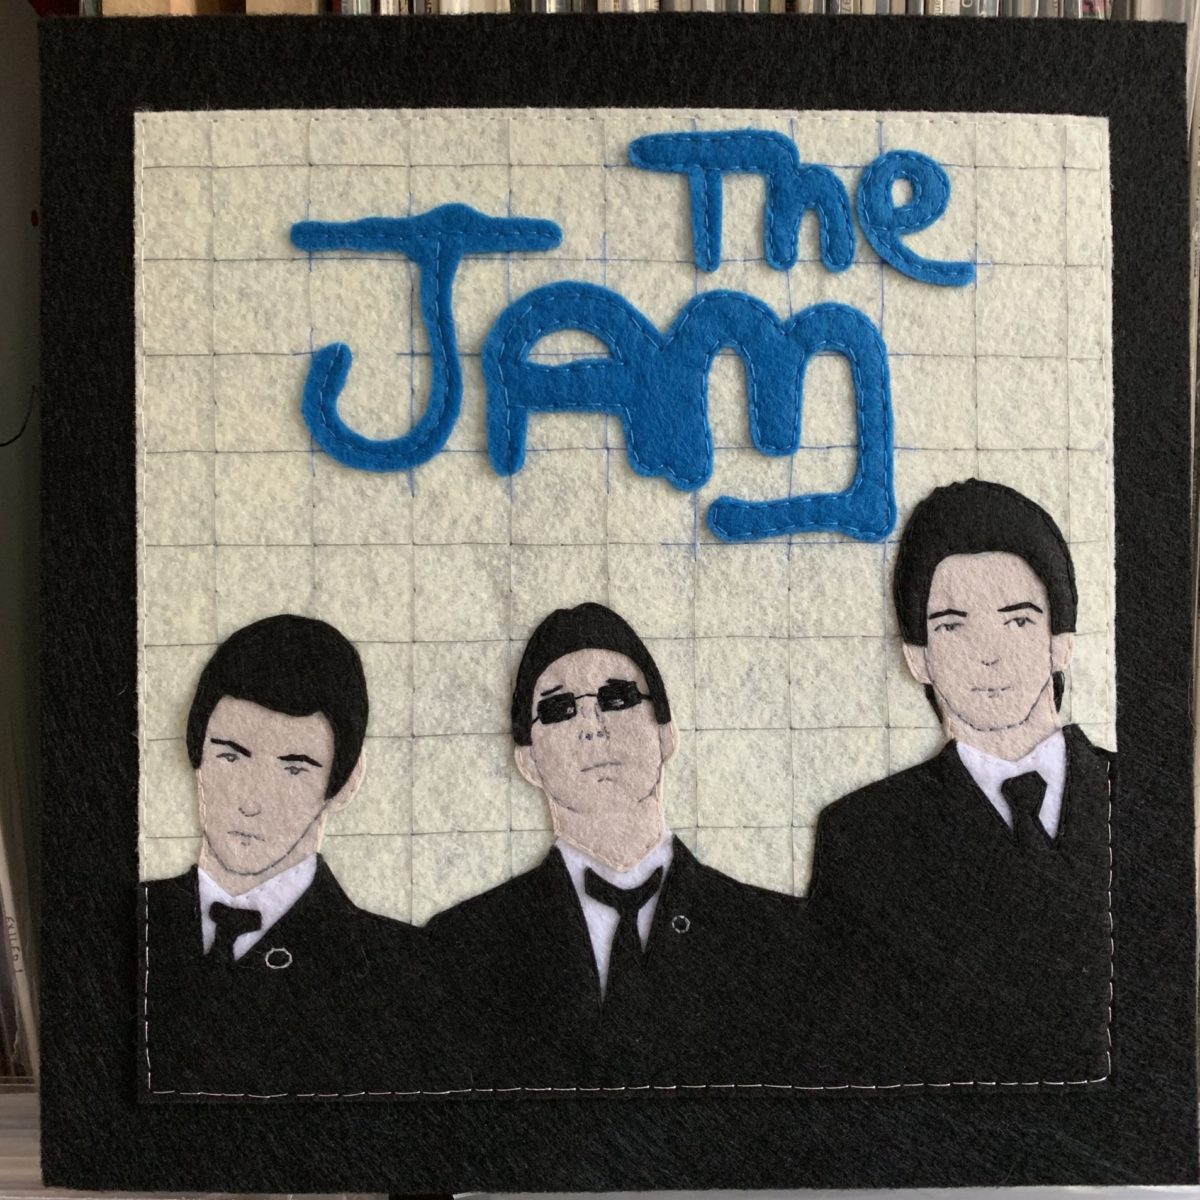 The Jam – In The City (1977)